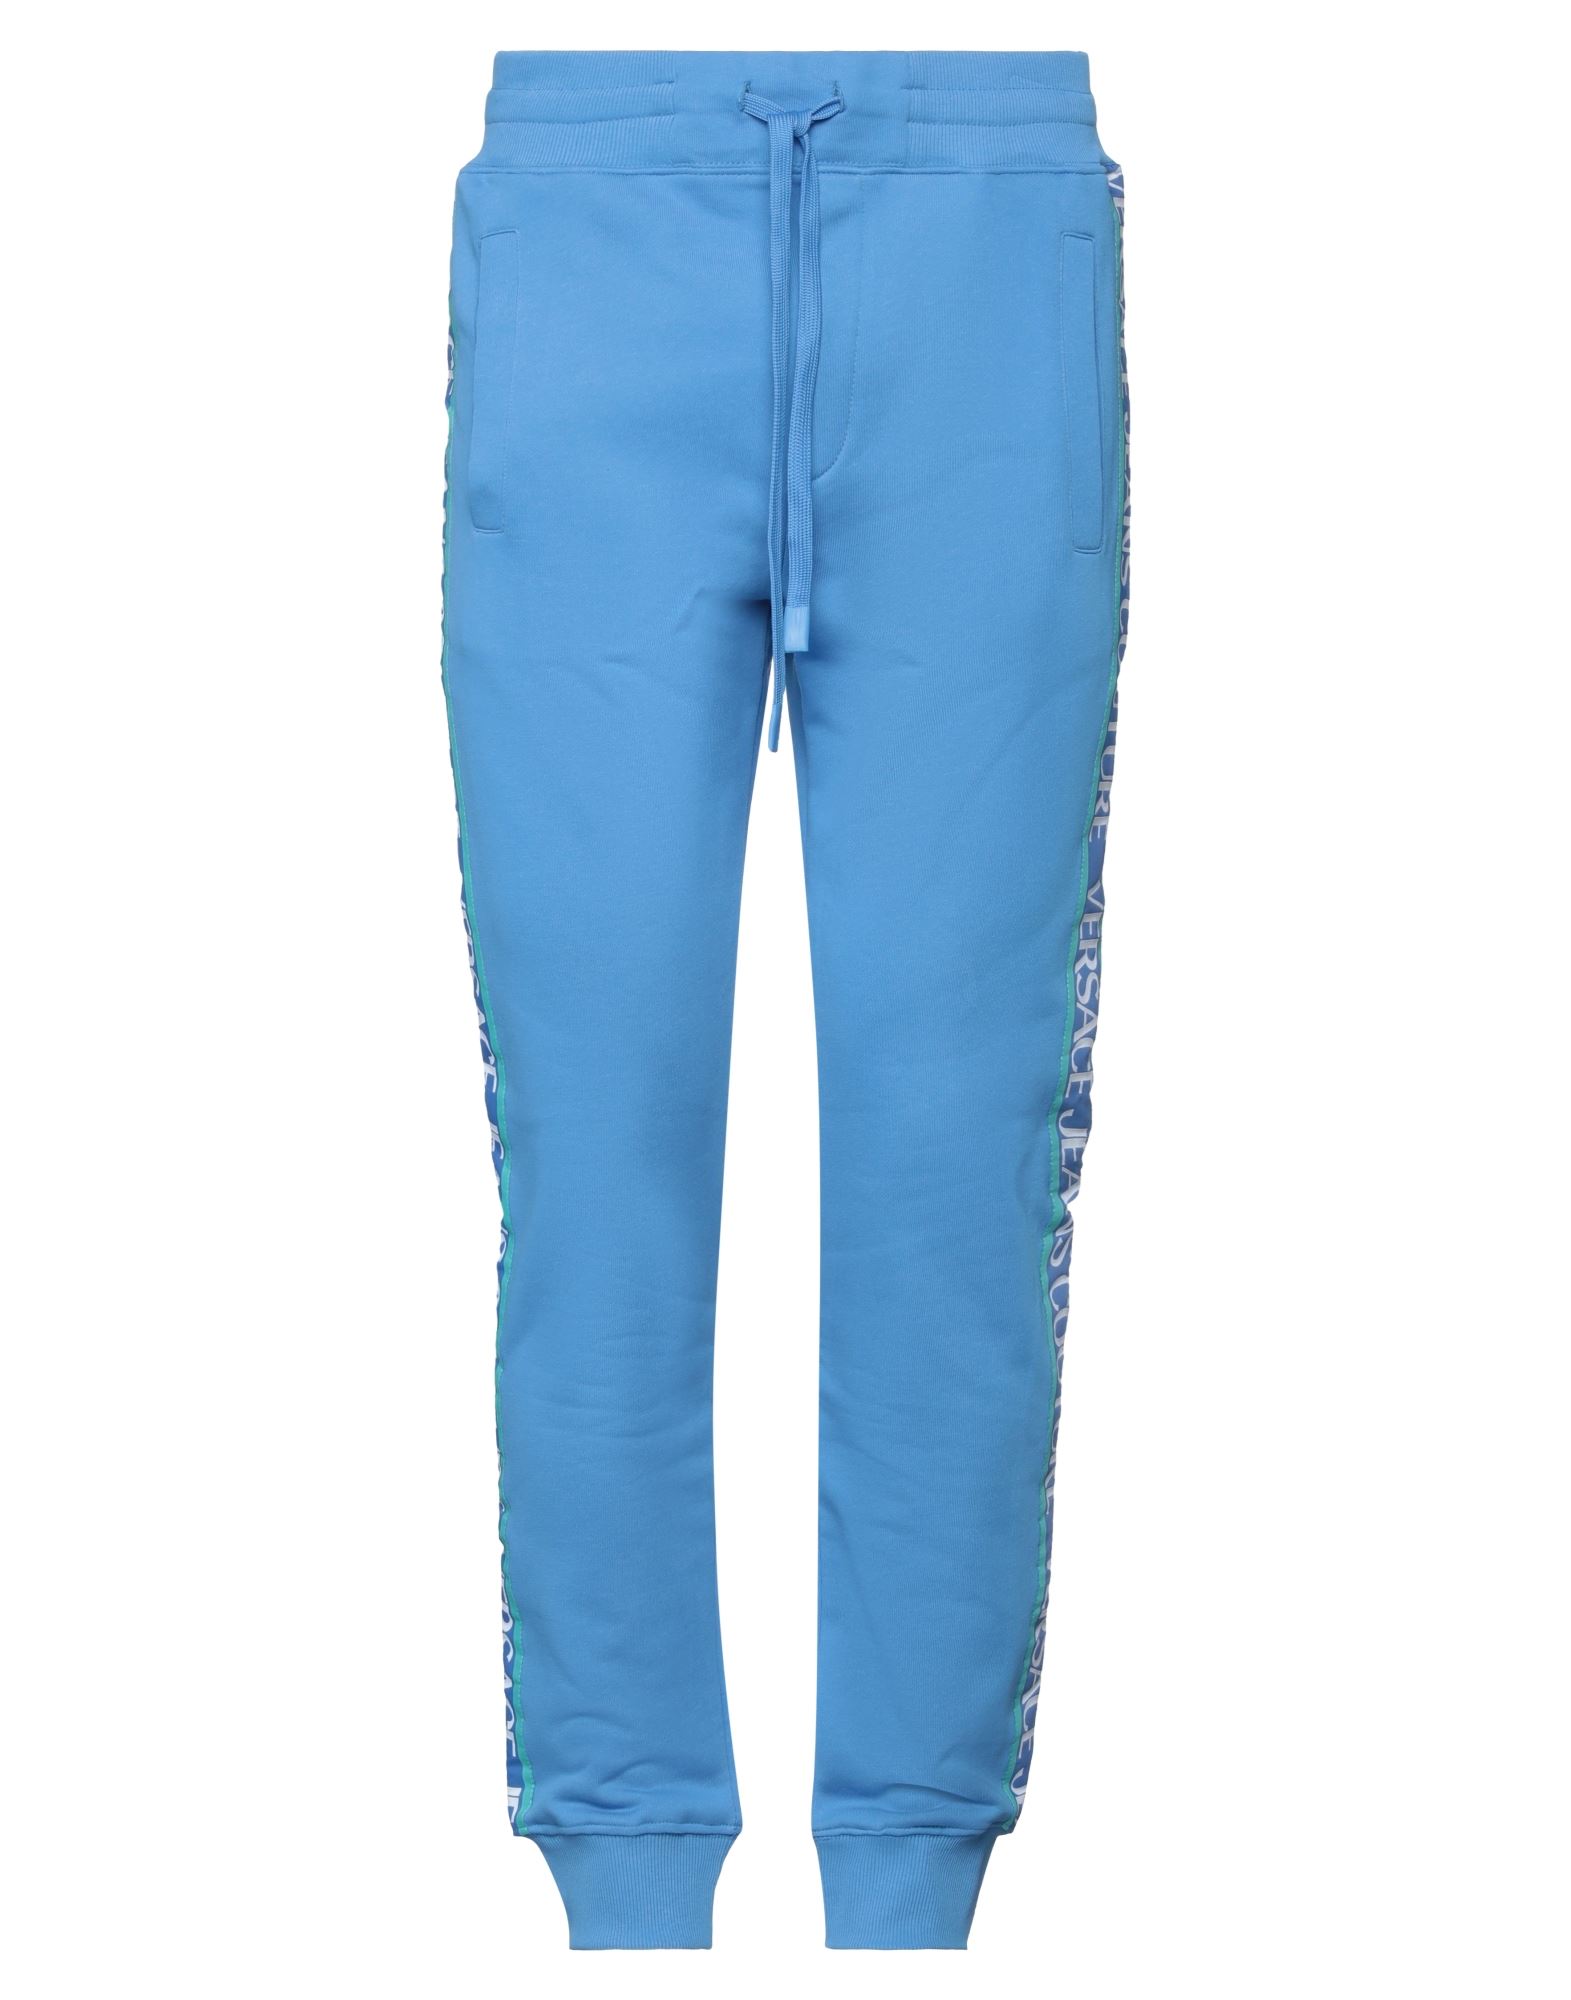 Versace Jeans Couture Pants In Blue